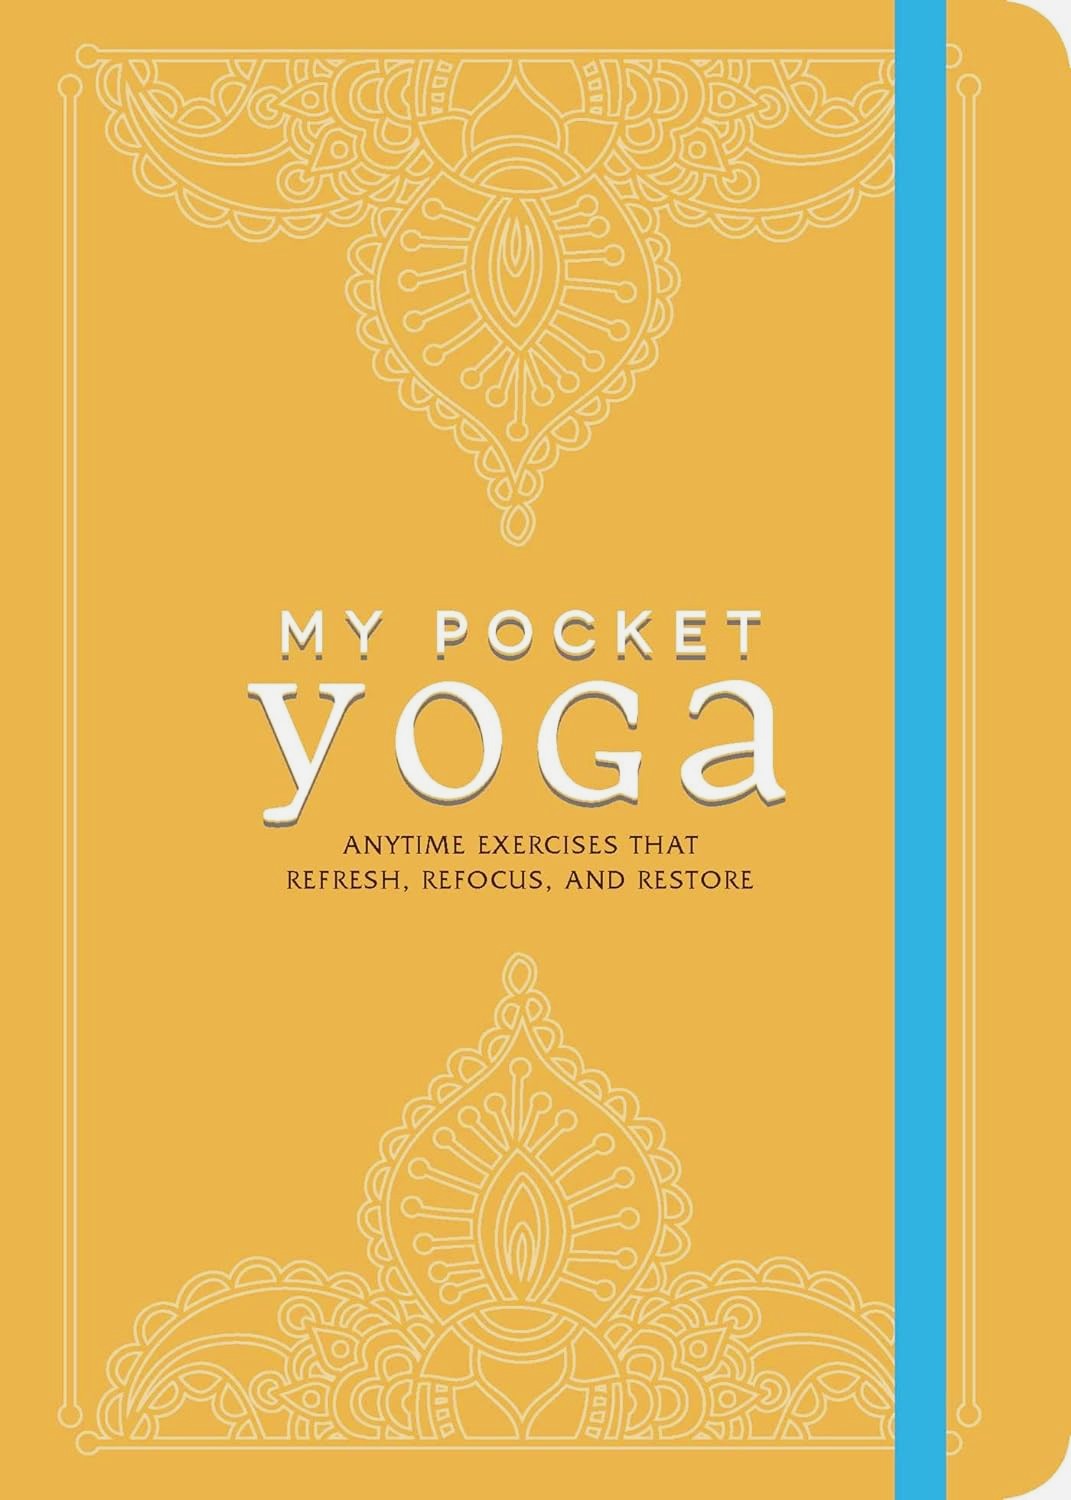 My Pocket Yoga: Anytime Exercises That Refresh, Refocus, and Restore - Adams Media